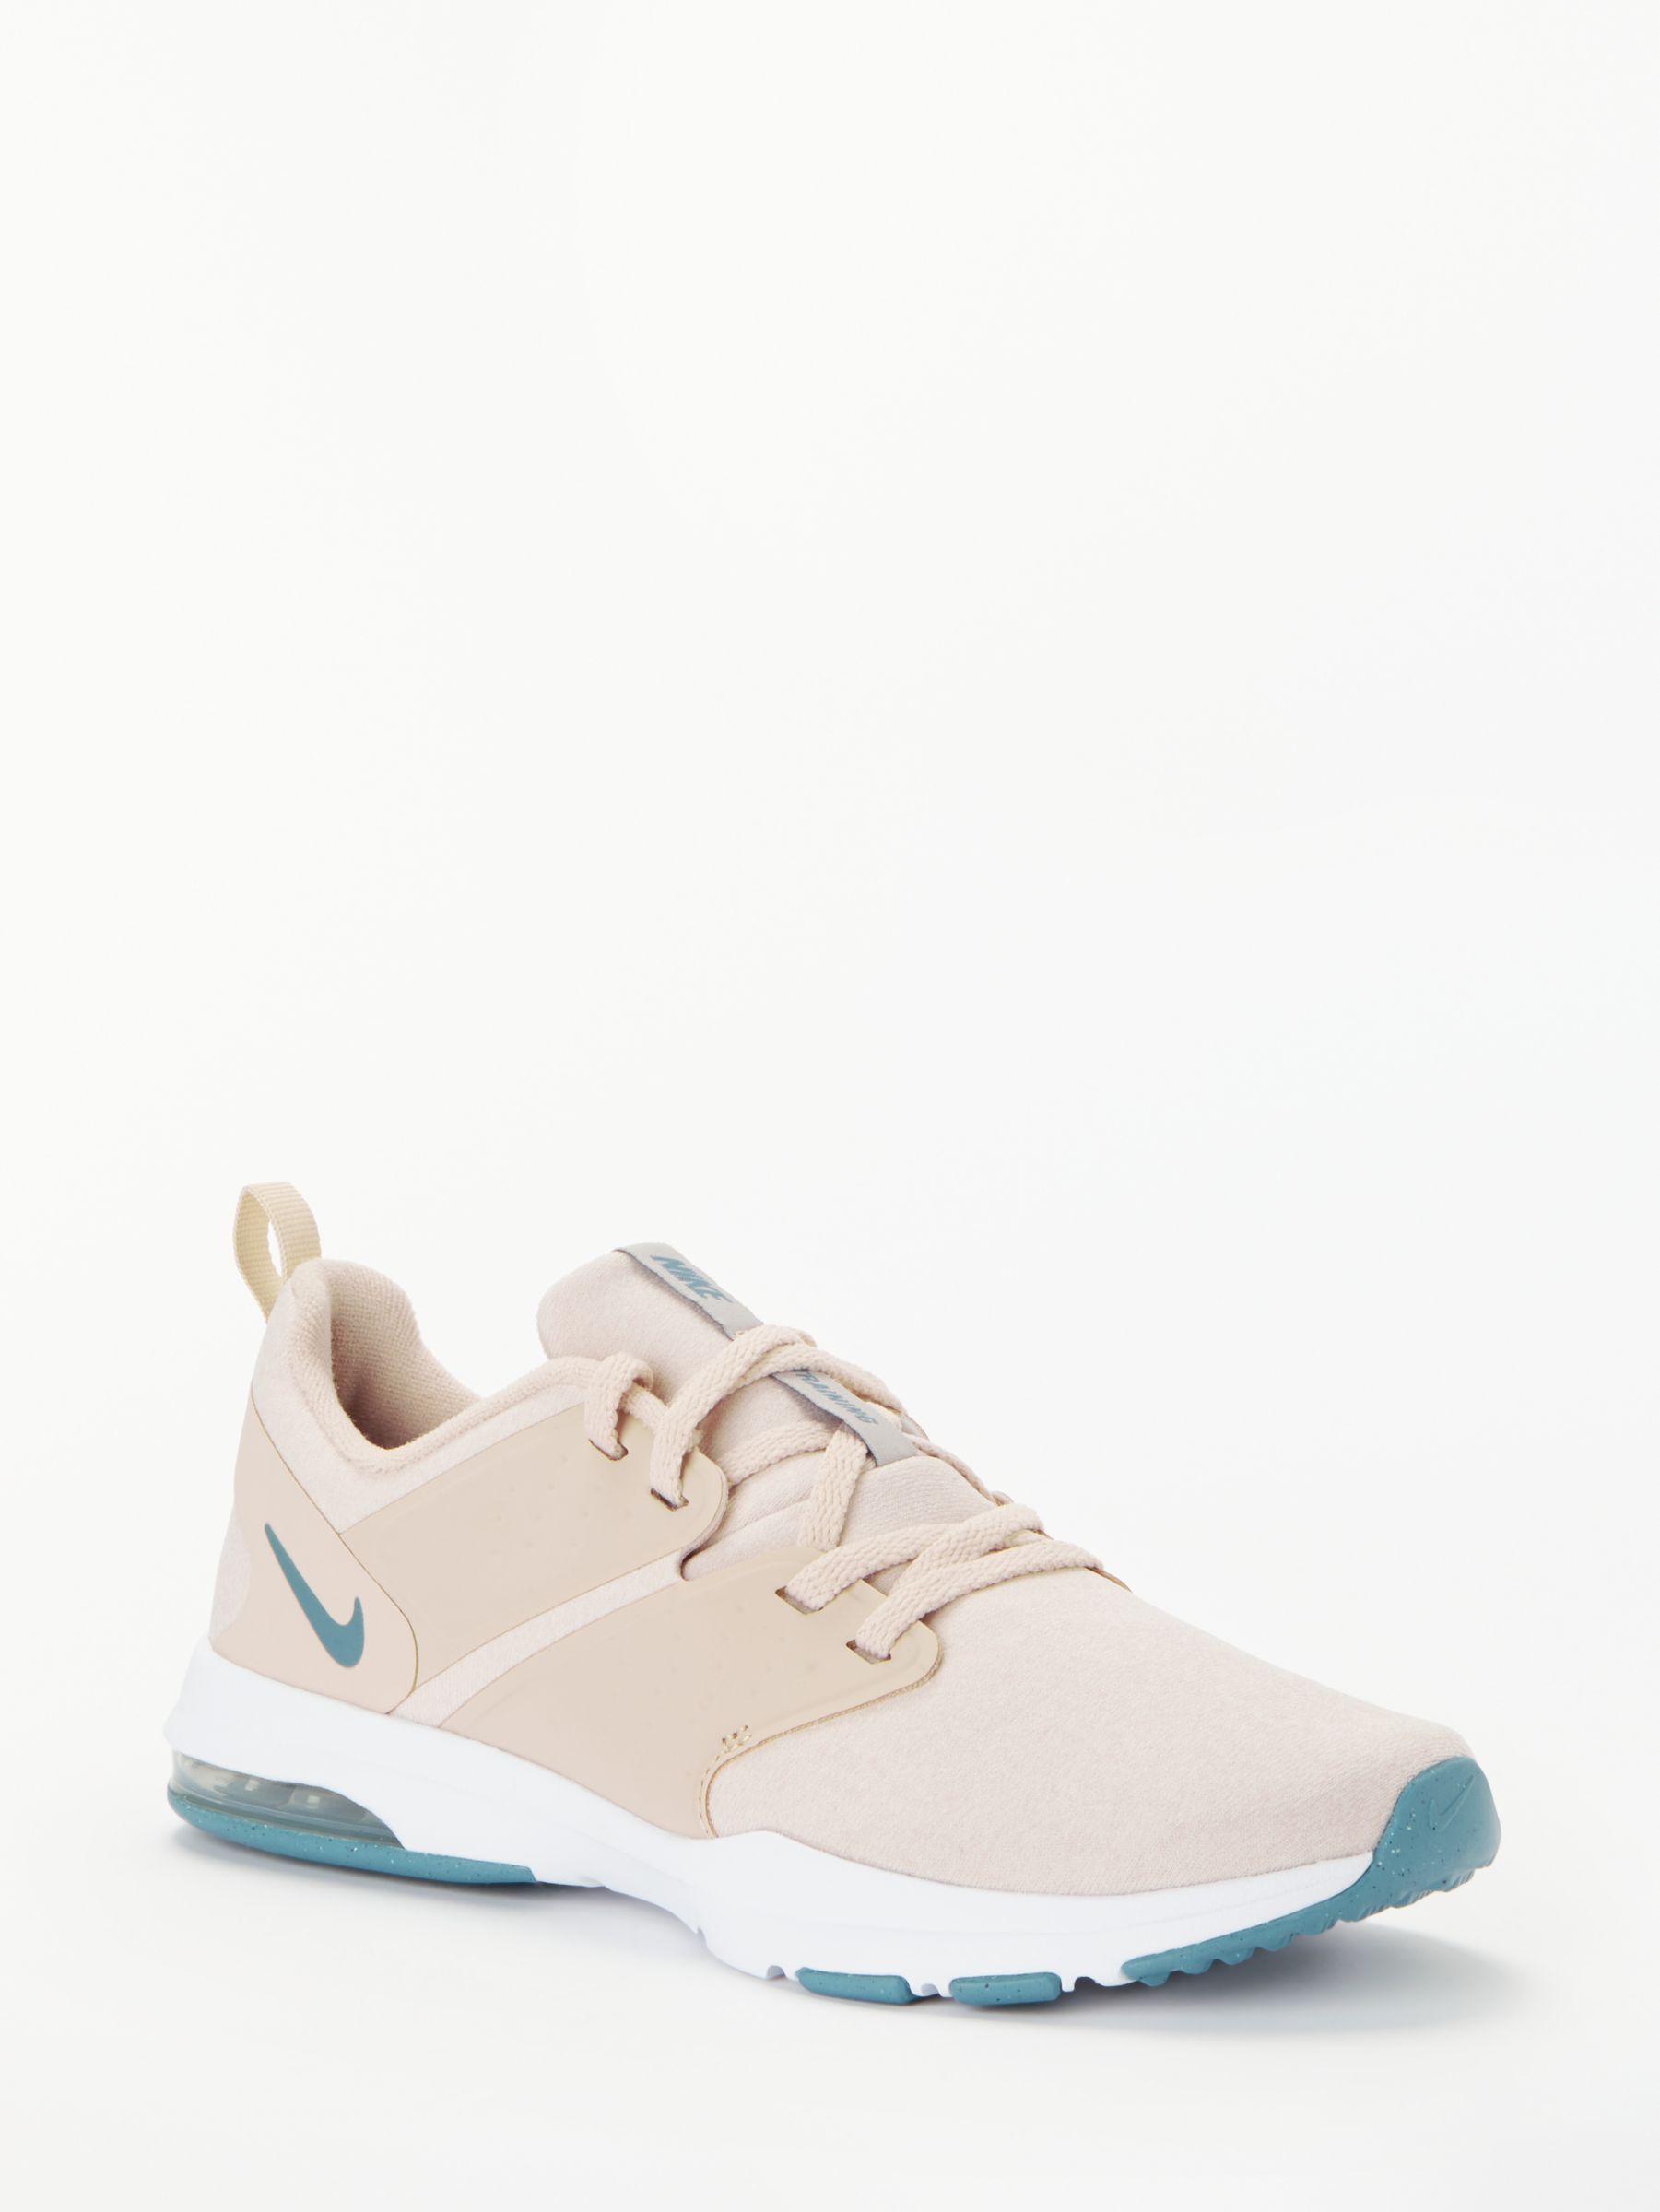 arco curso Productivo Nike Air Bella TR Women's Training Shoes, Particle Beige/Celestial  Teal/Guava Ice